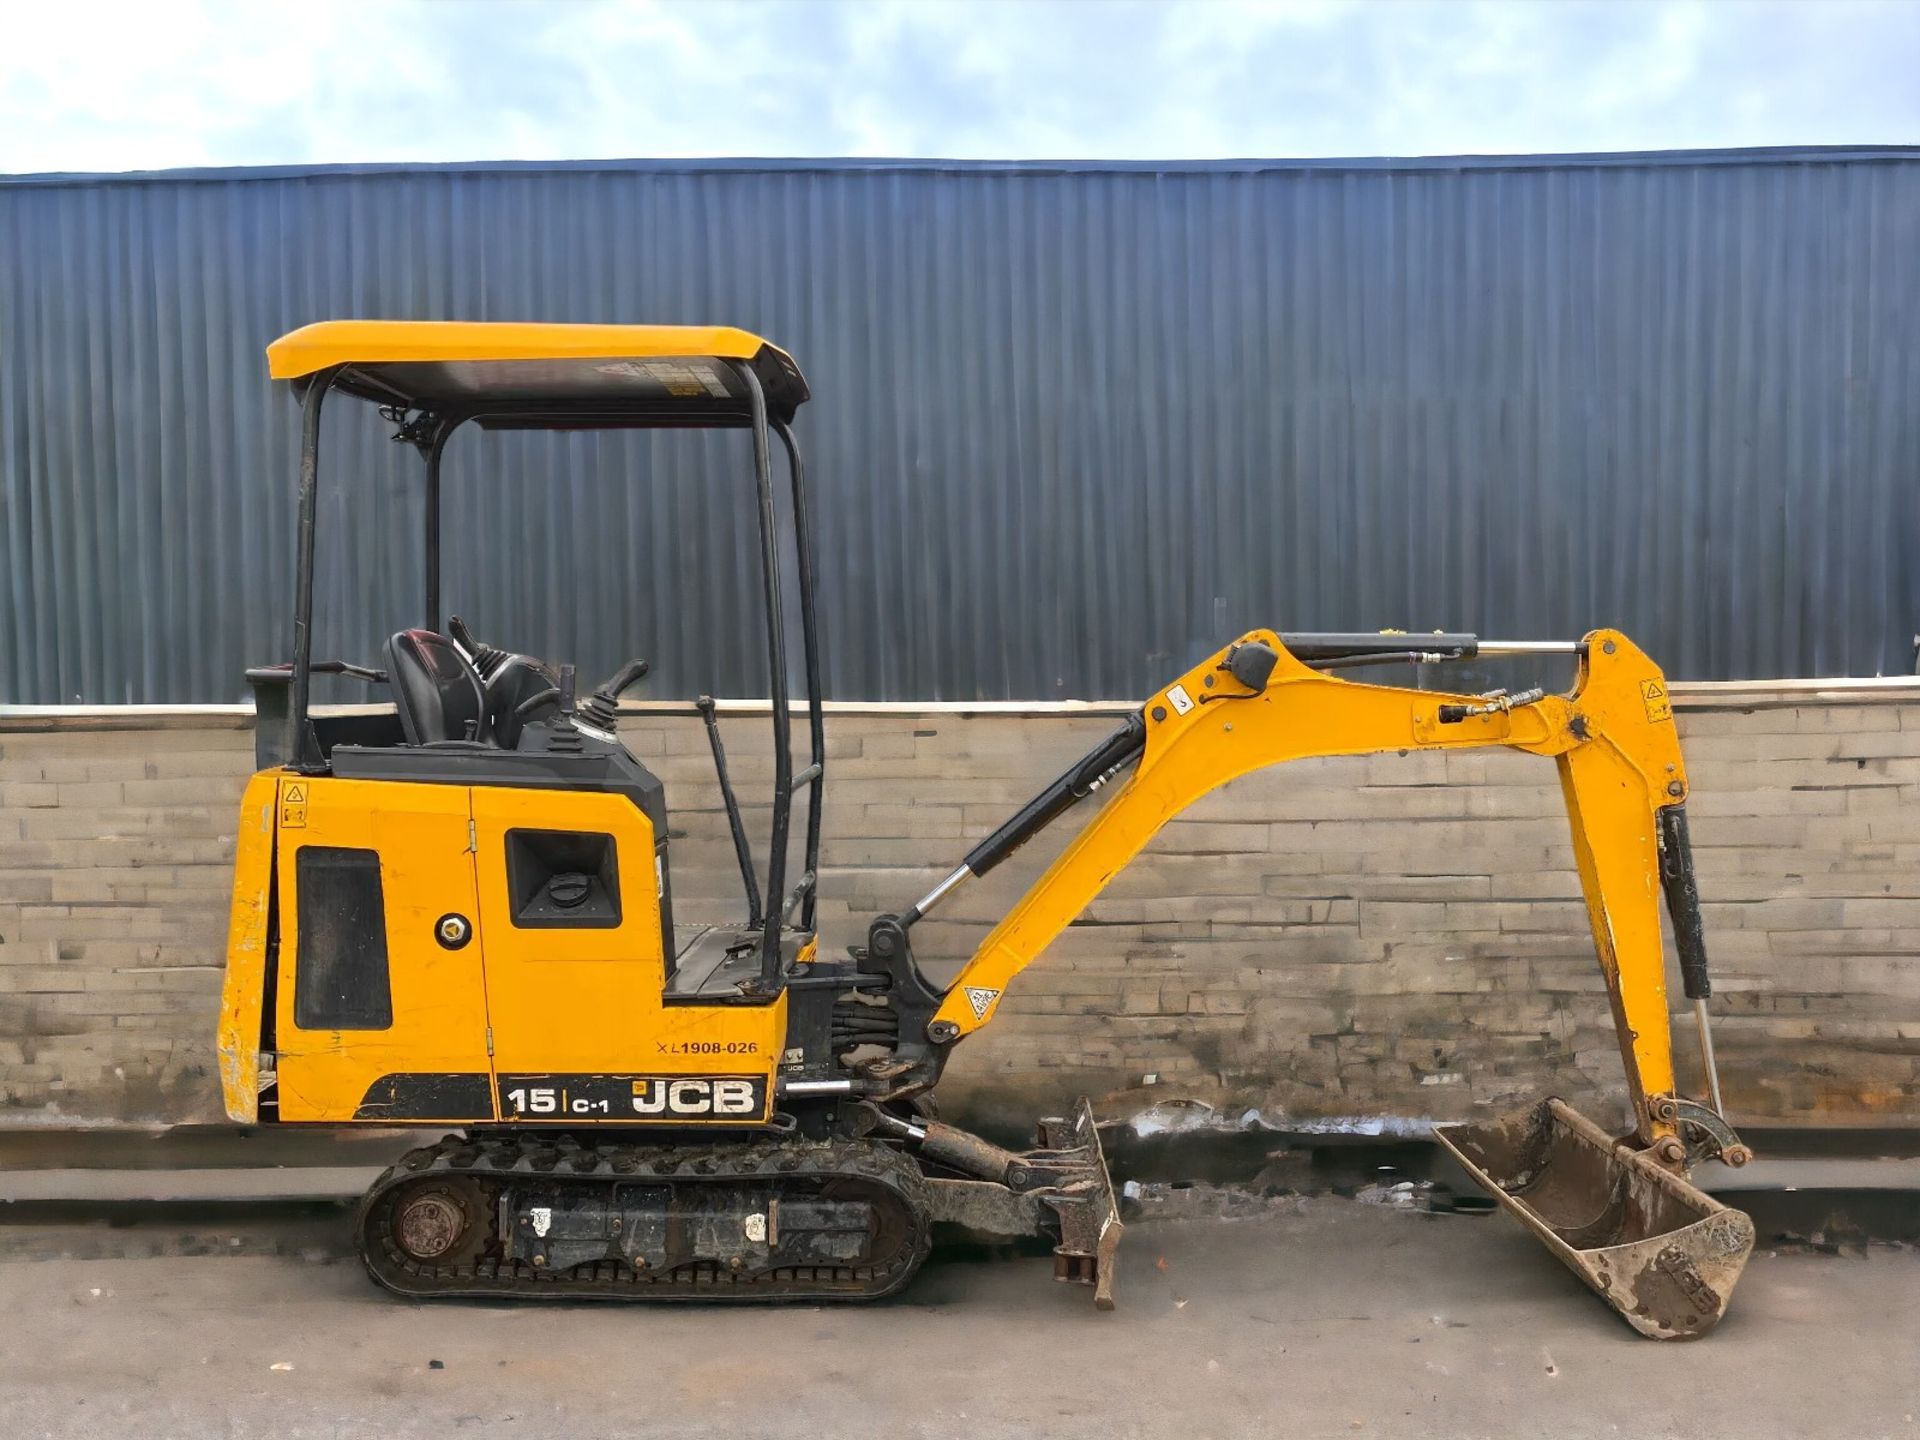 ELEVATE YOUR CONSTRUCTION GAME WITH THE JCB 15 C-1 MINI EXCAVATO - Image 4 of 11